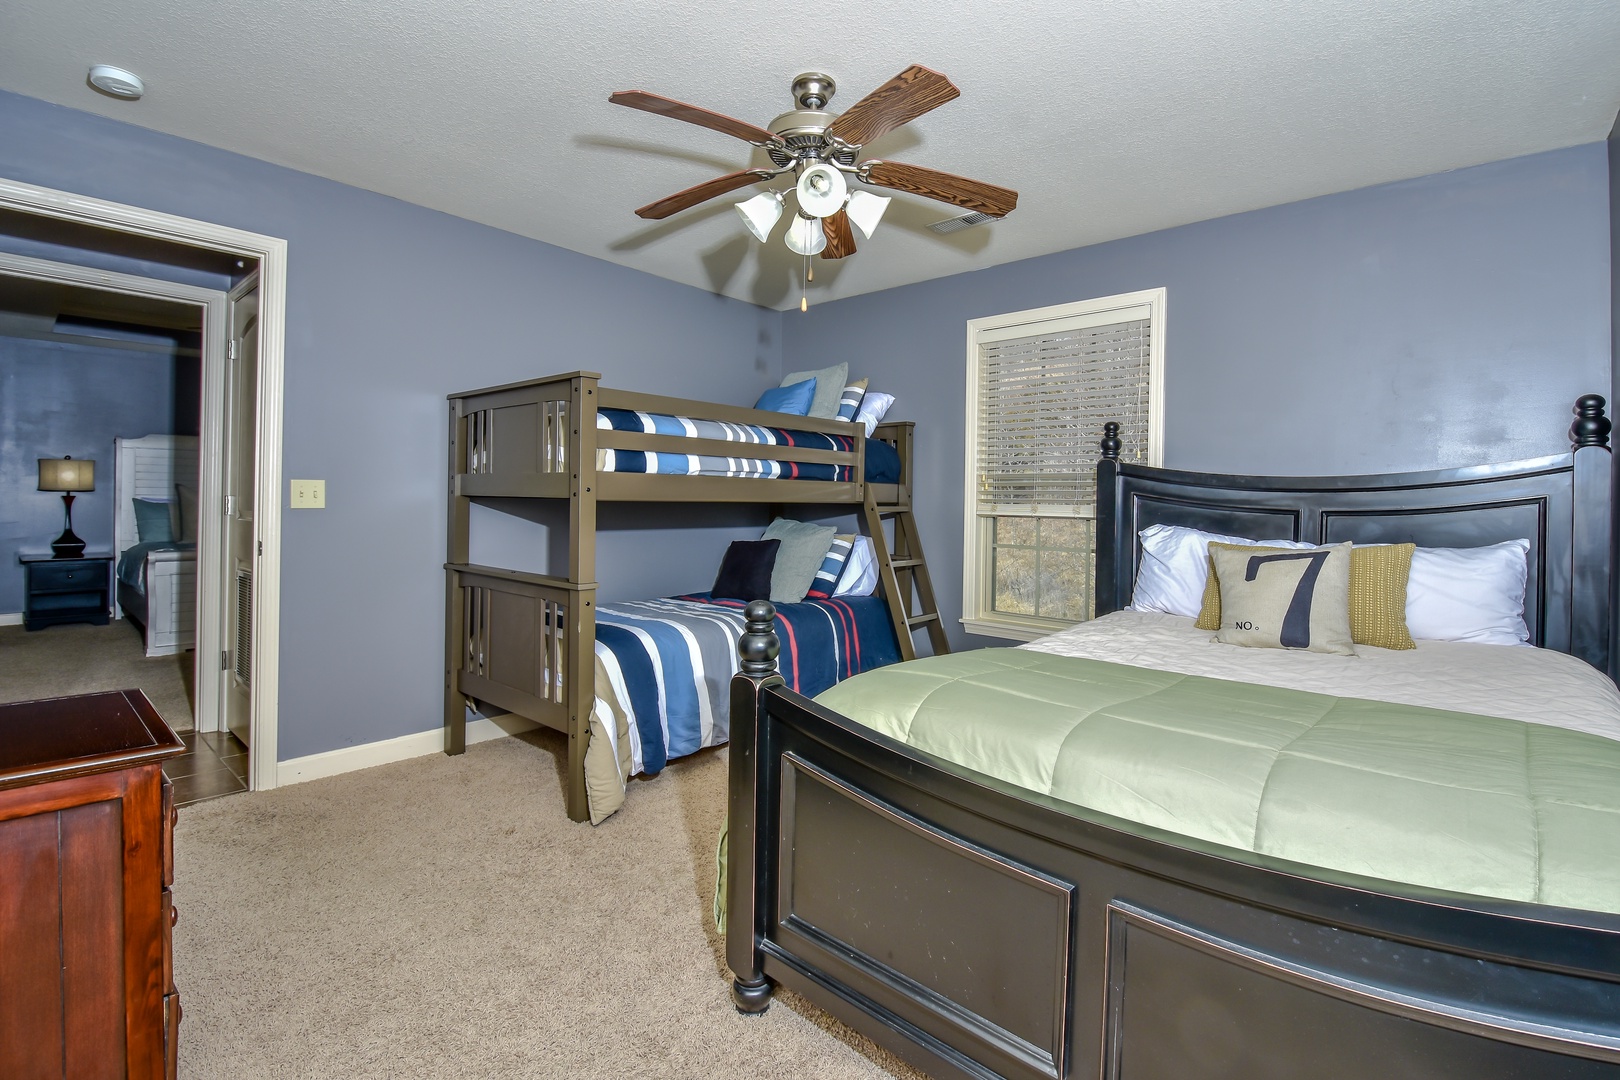 Twin-over-twin bunks, a queen bed, & Smart TV await in the second bedroom